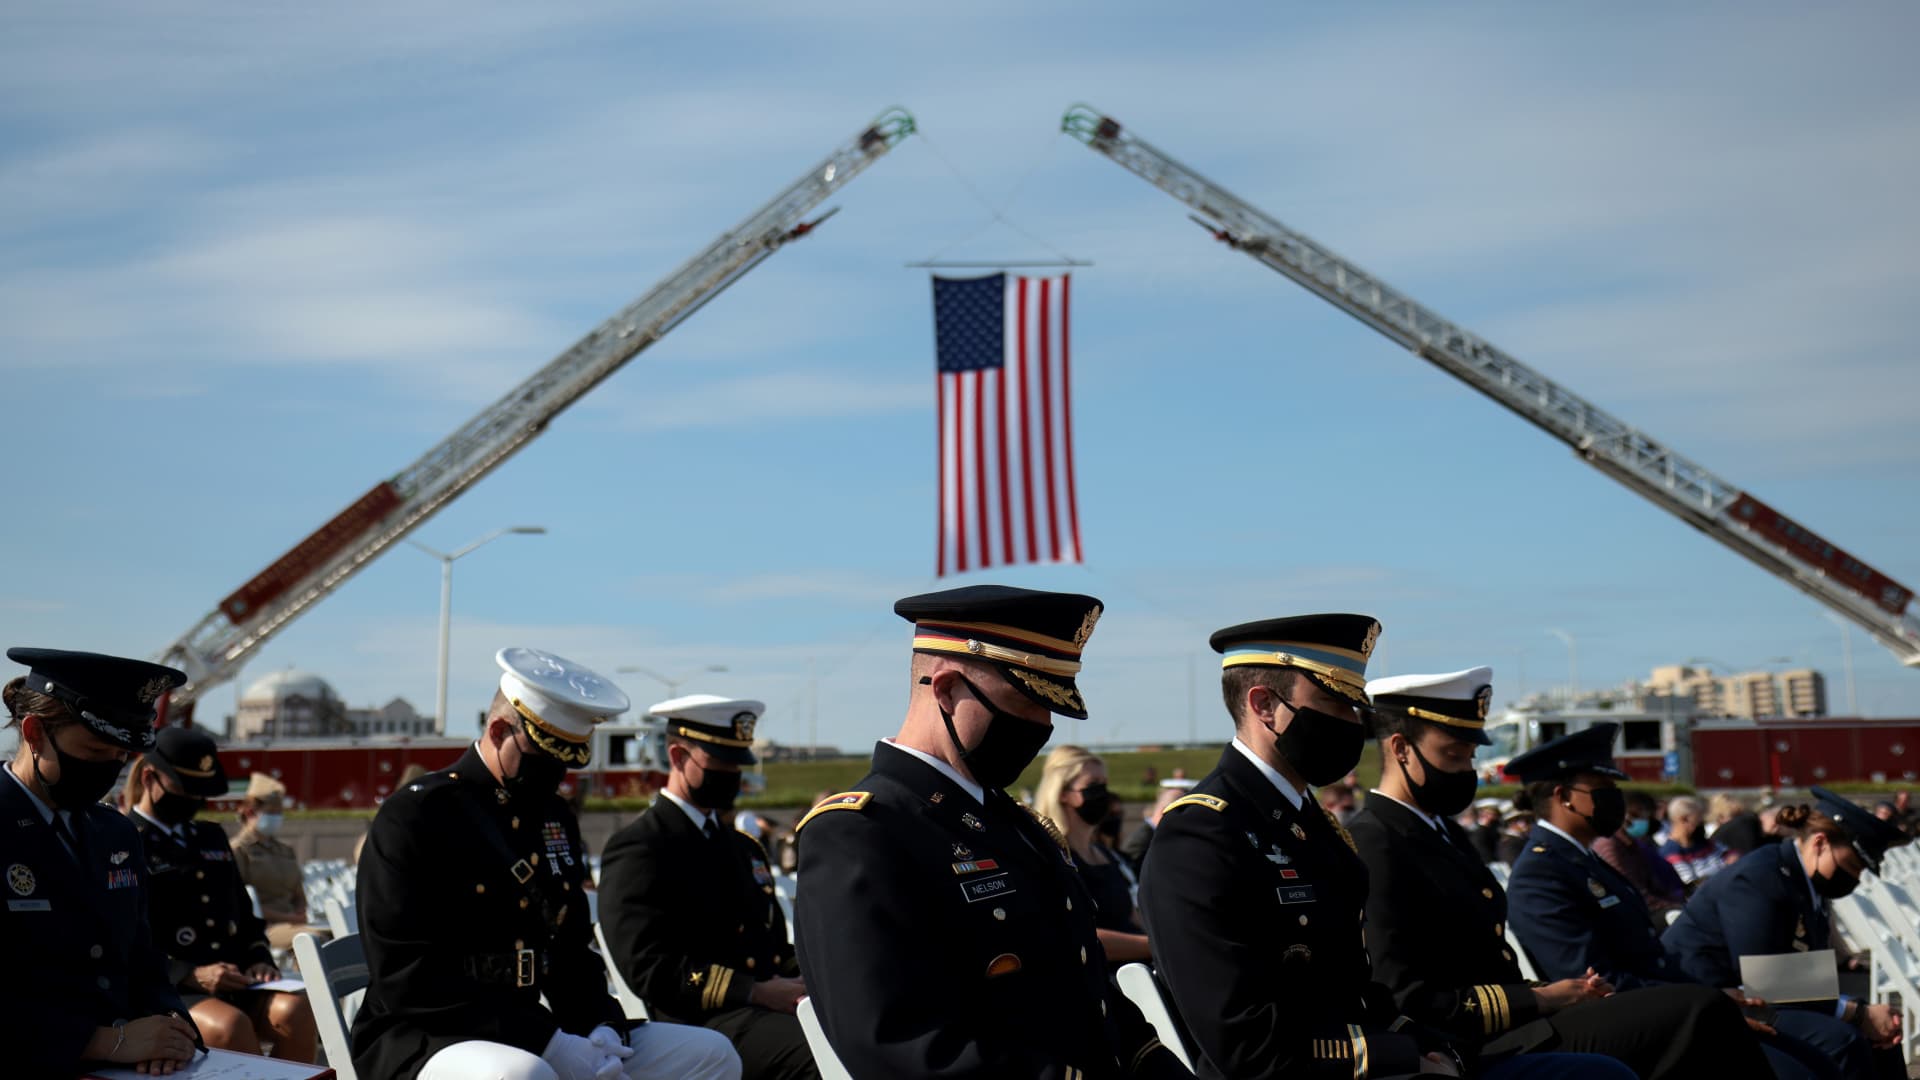 U.S. service members attend the Pentagon 9/11 observance ceremony at the National 9/11 Pentagon Memorial on September 11, 2021 in Arlington, Virginia.